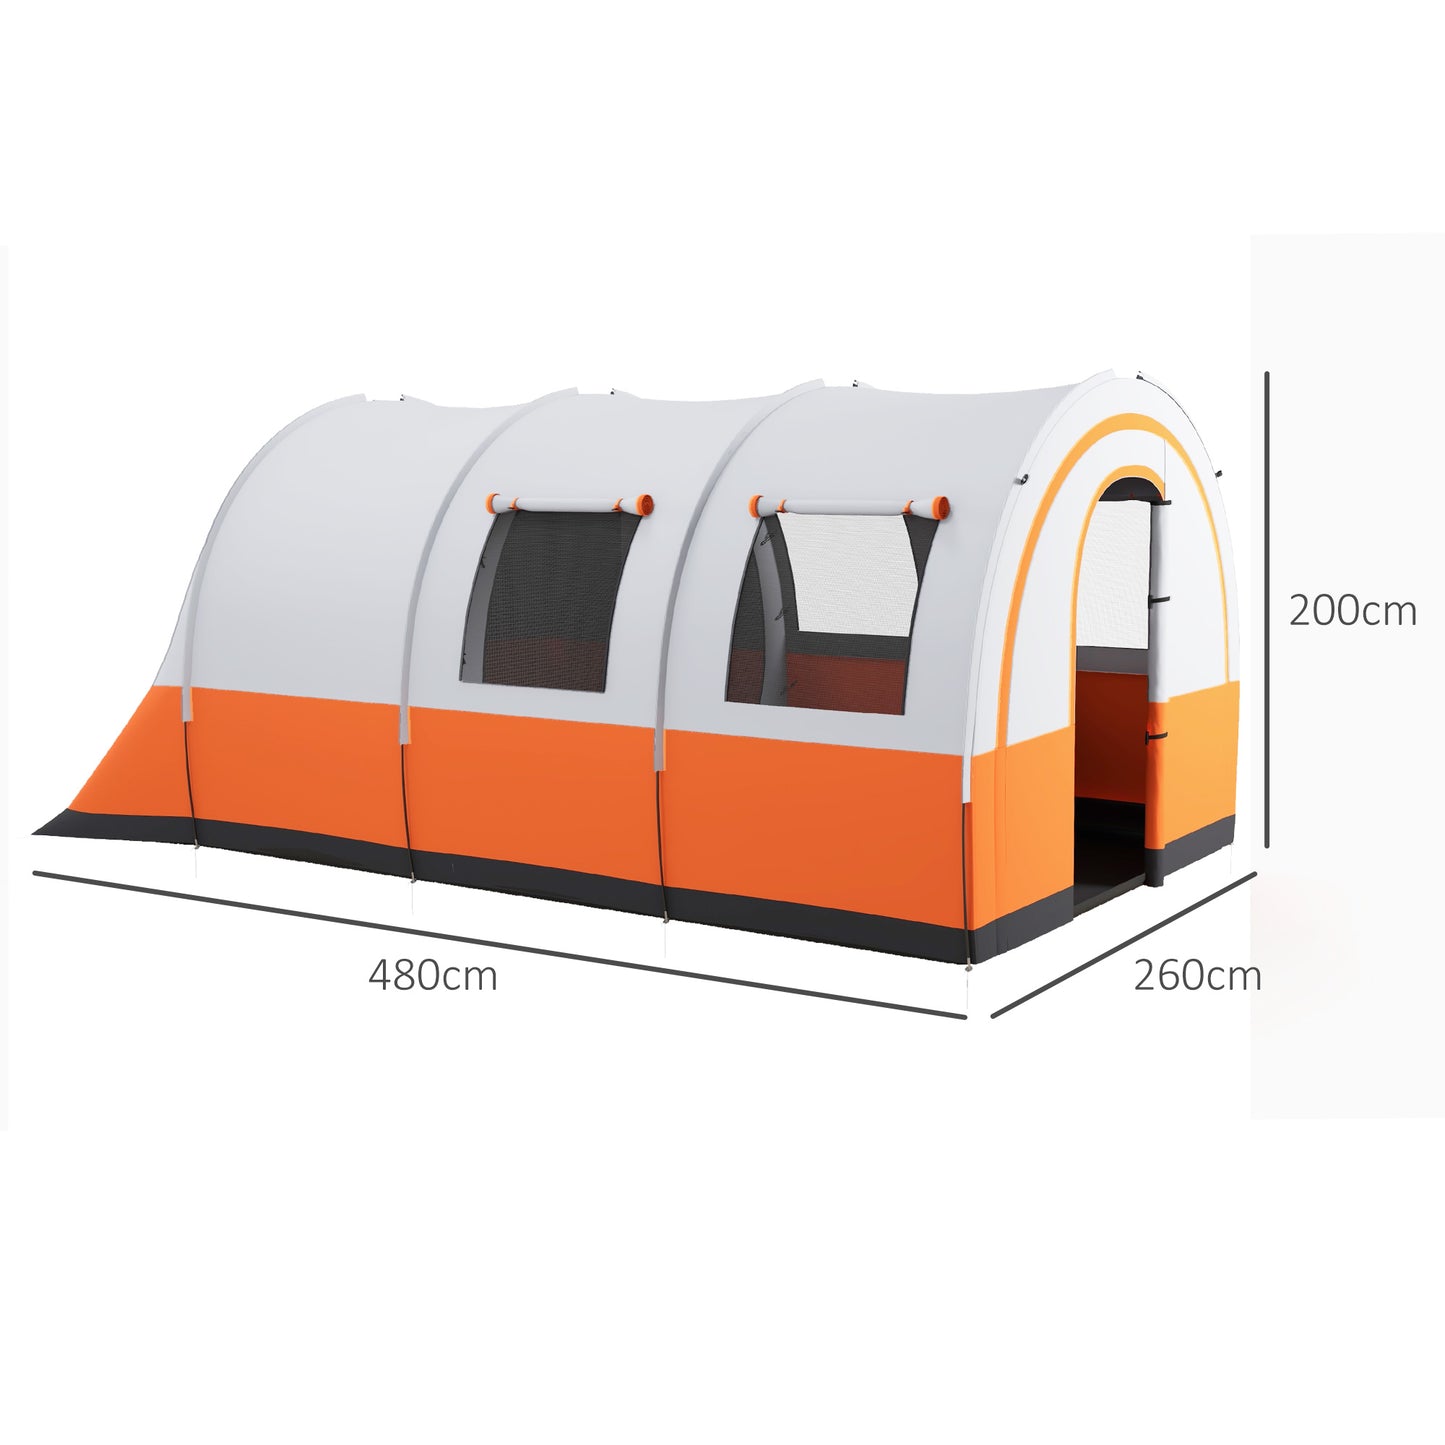 Outsunny 3000mm Waterproof Camping Tent 5-6 Man Family Tent with Living and Bedroom Carry Bag Included Cream and Orange